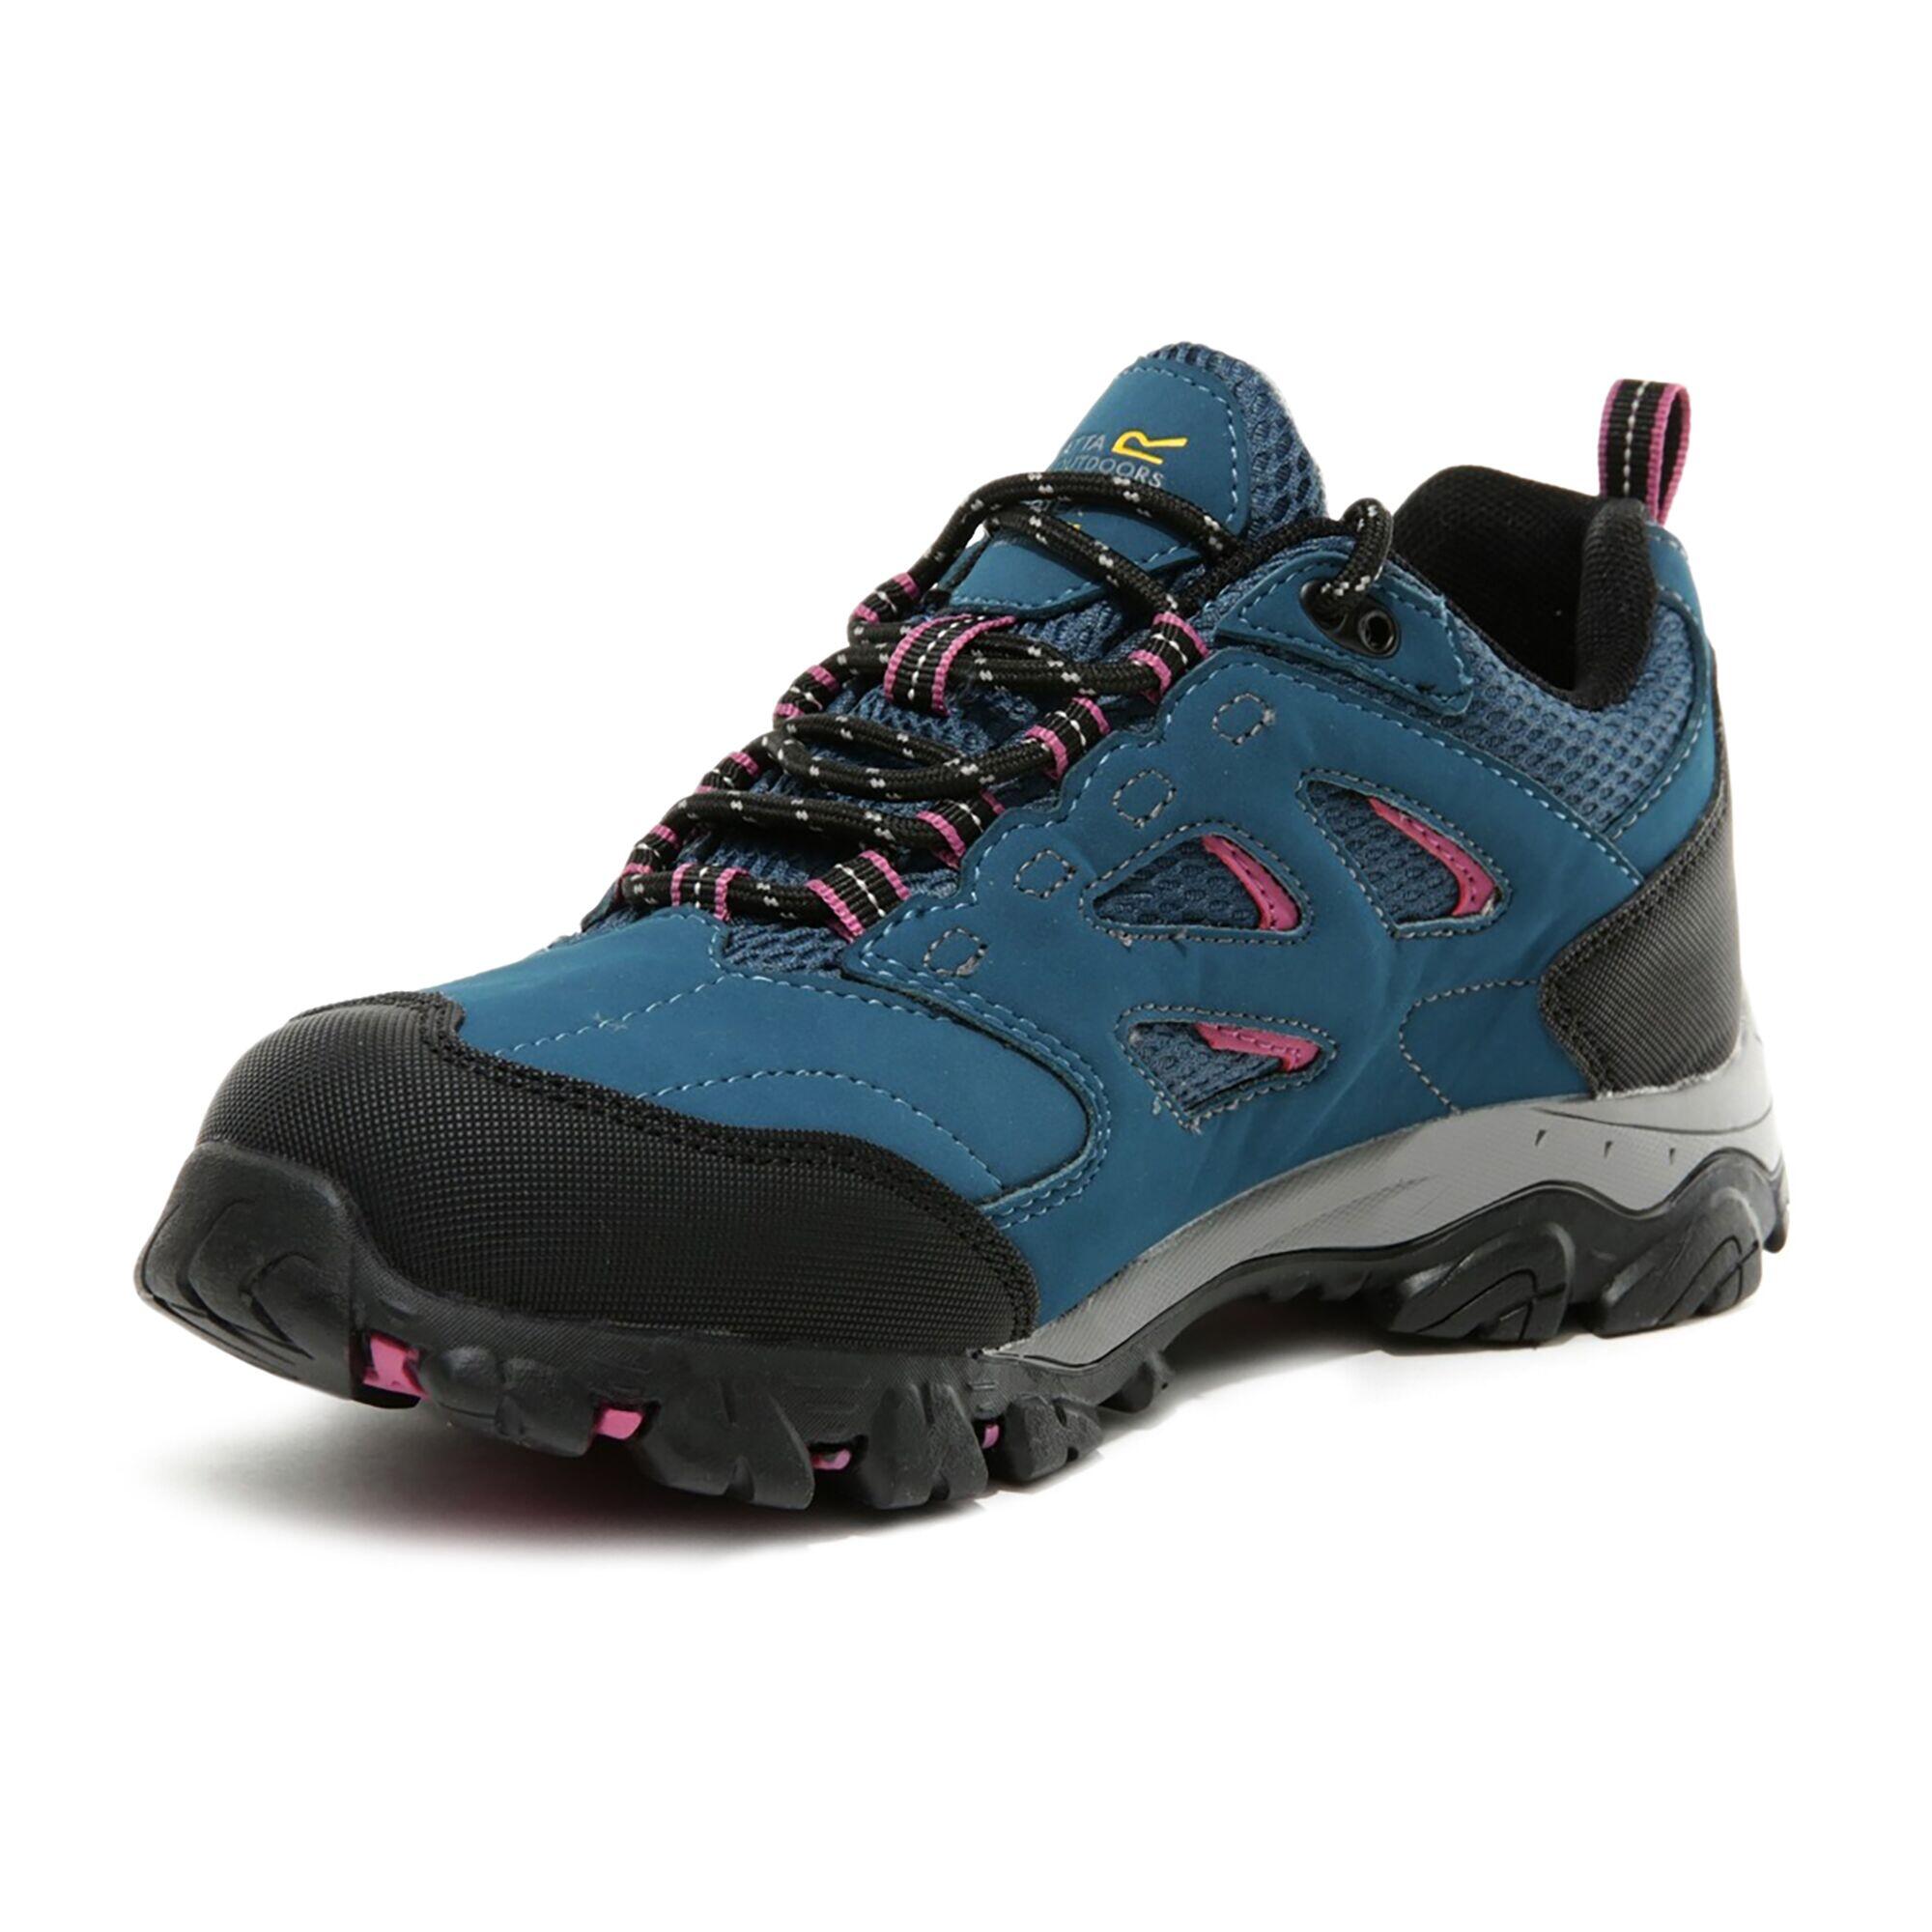 Lady Holcombe IEP Low Women's Hiking Boots - Moroccan Blue / Red 3/5